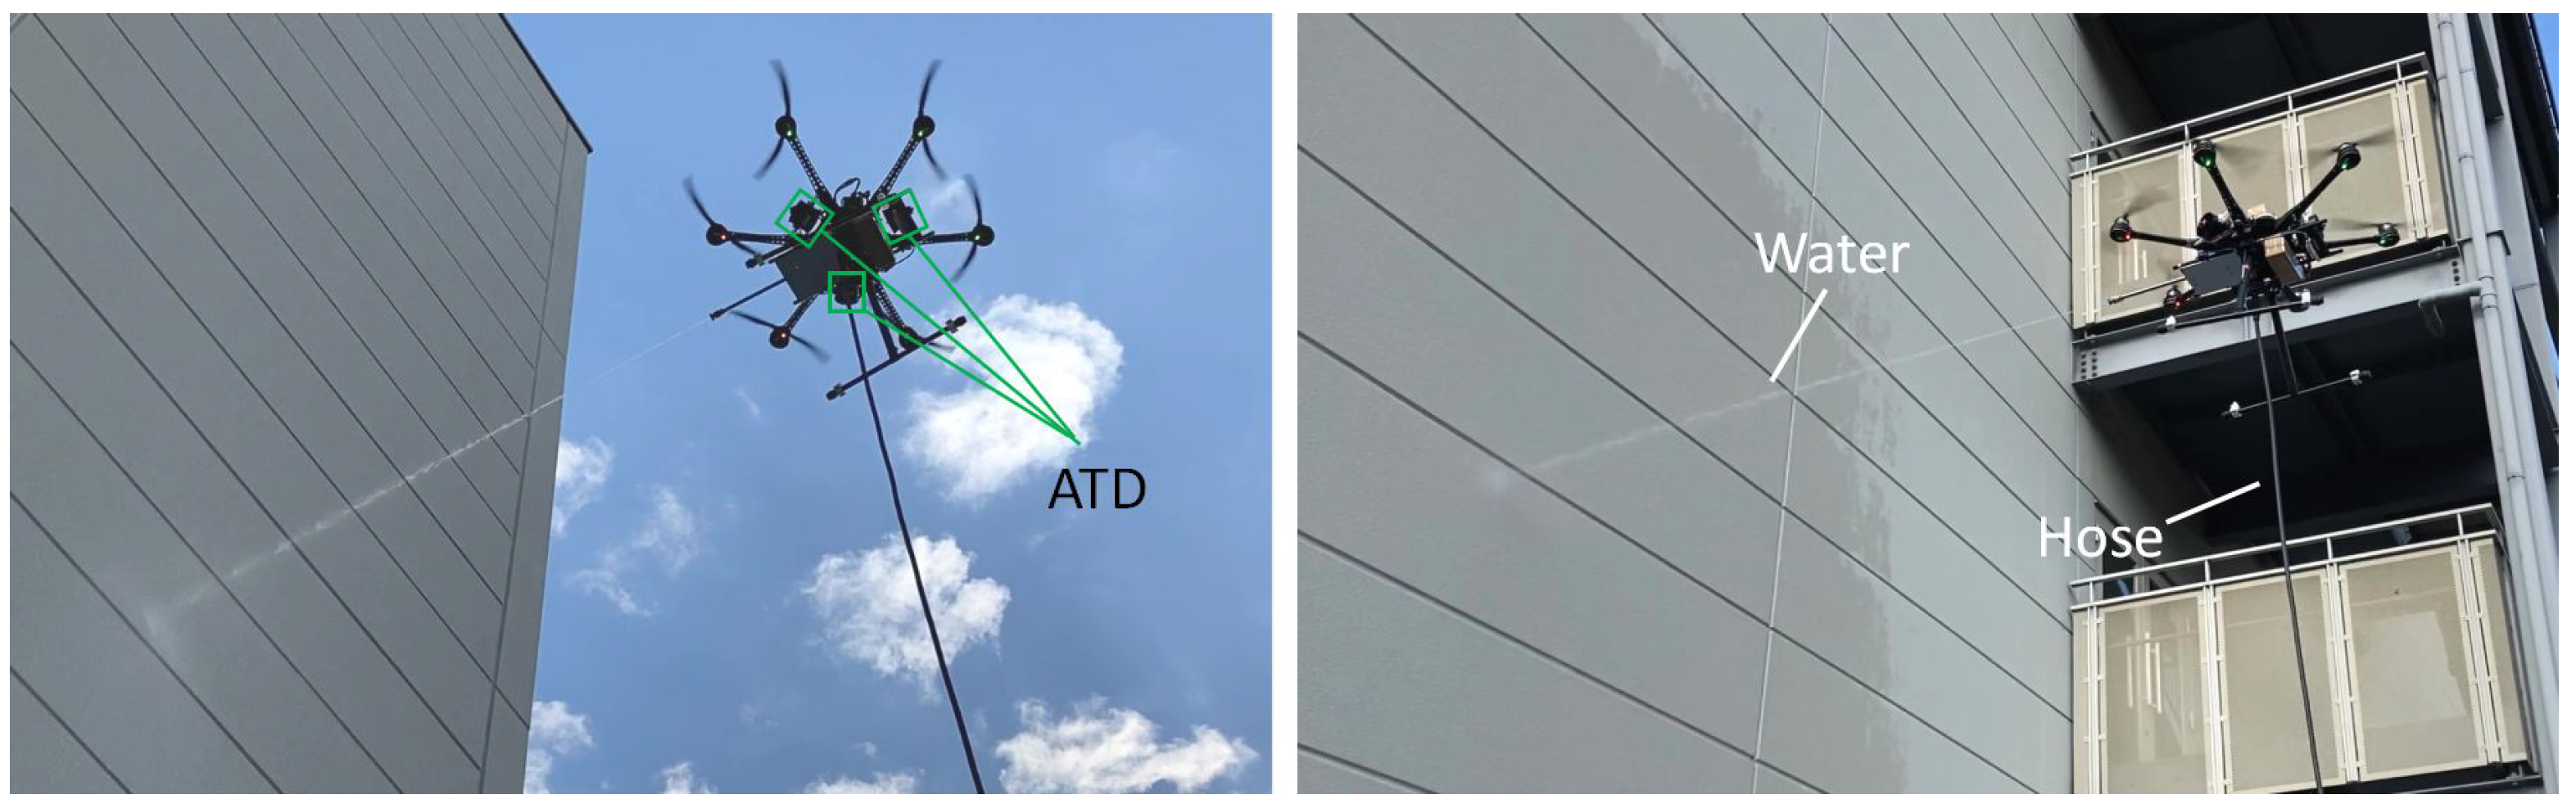 Drones | Free Full-Text | Flying Washer: Development of High-Pressure  Washing Aerial Robot Employing Multirotor Platform with Add-On Thrusters